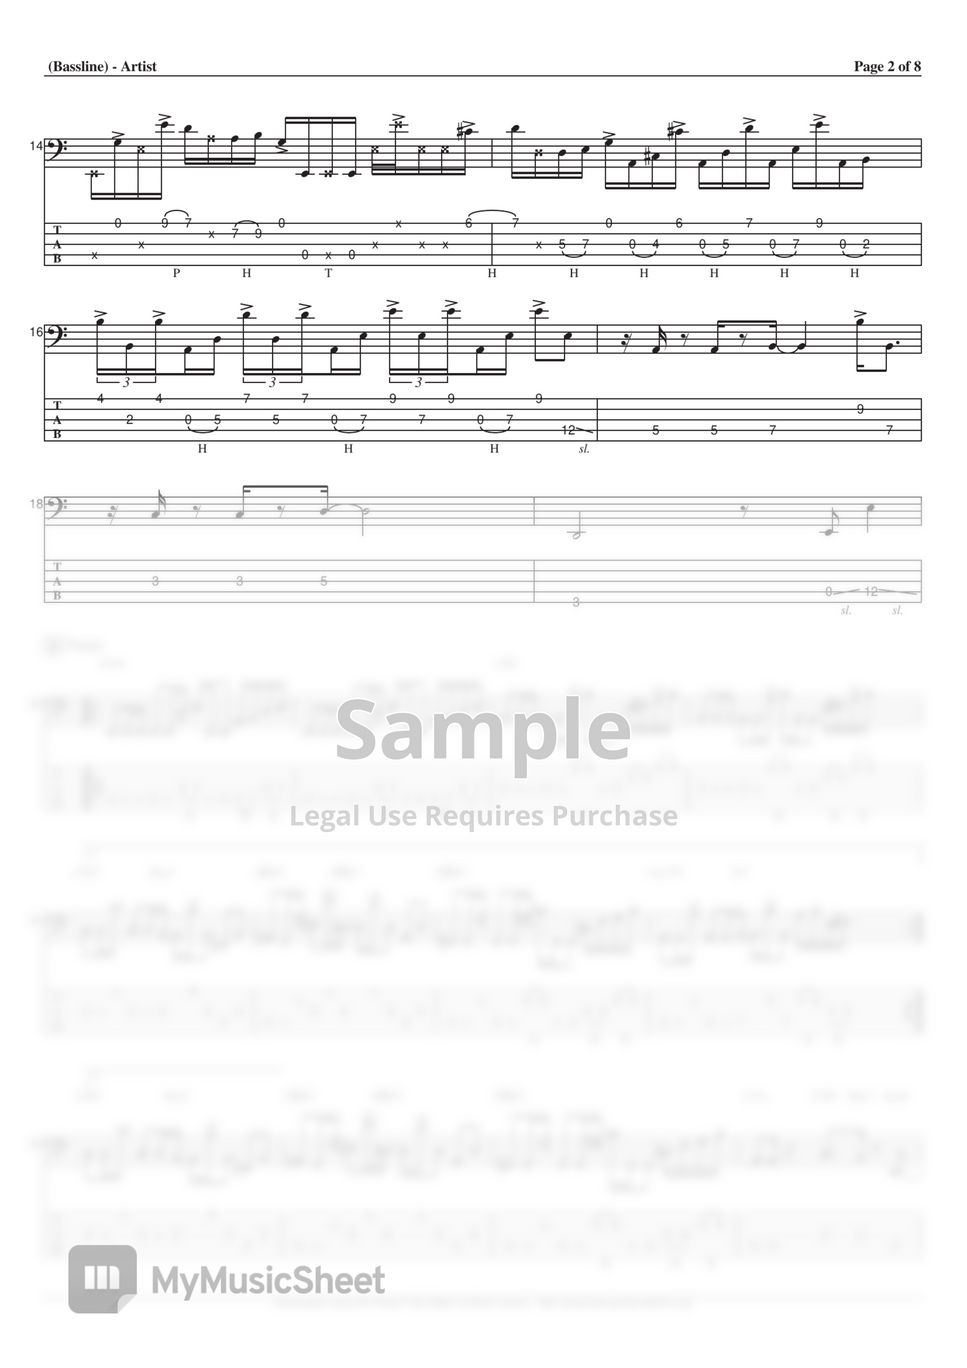 T-SQUARE - Explorer (Bass tab 5-strings) by T's bass score